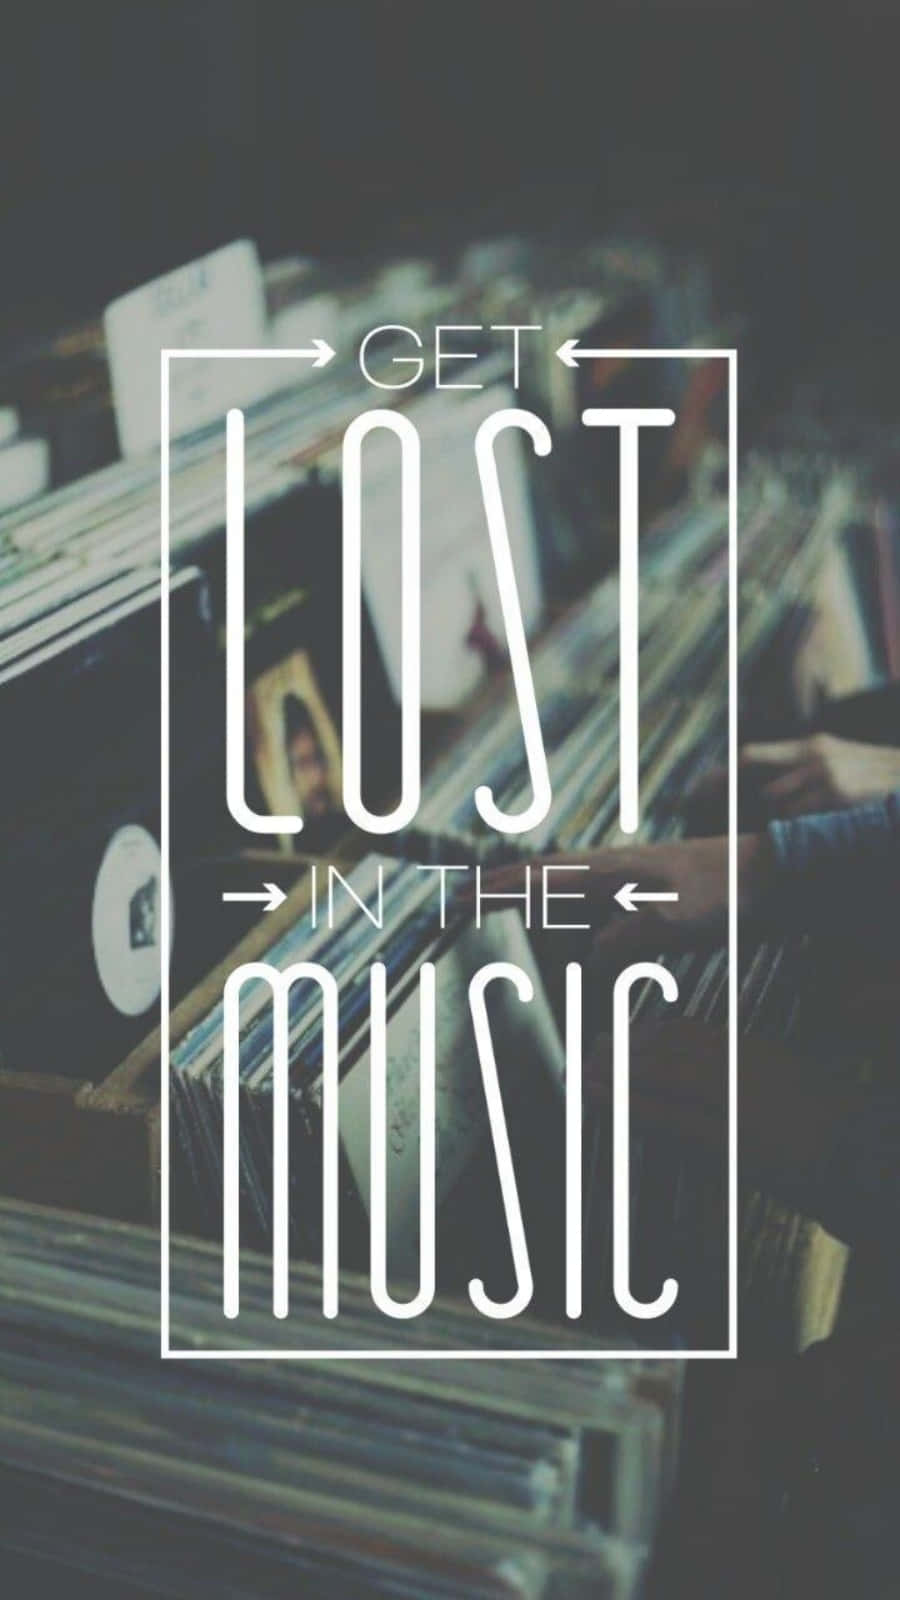 Lost In The Music Quote Wallpaper